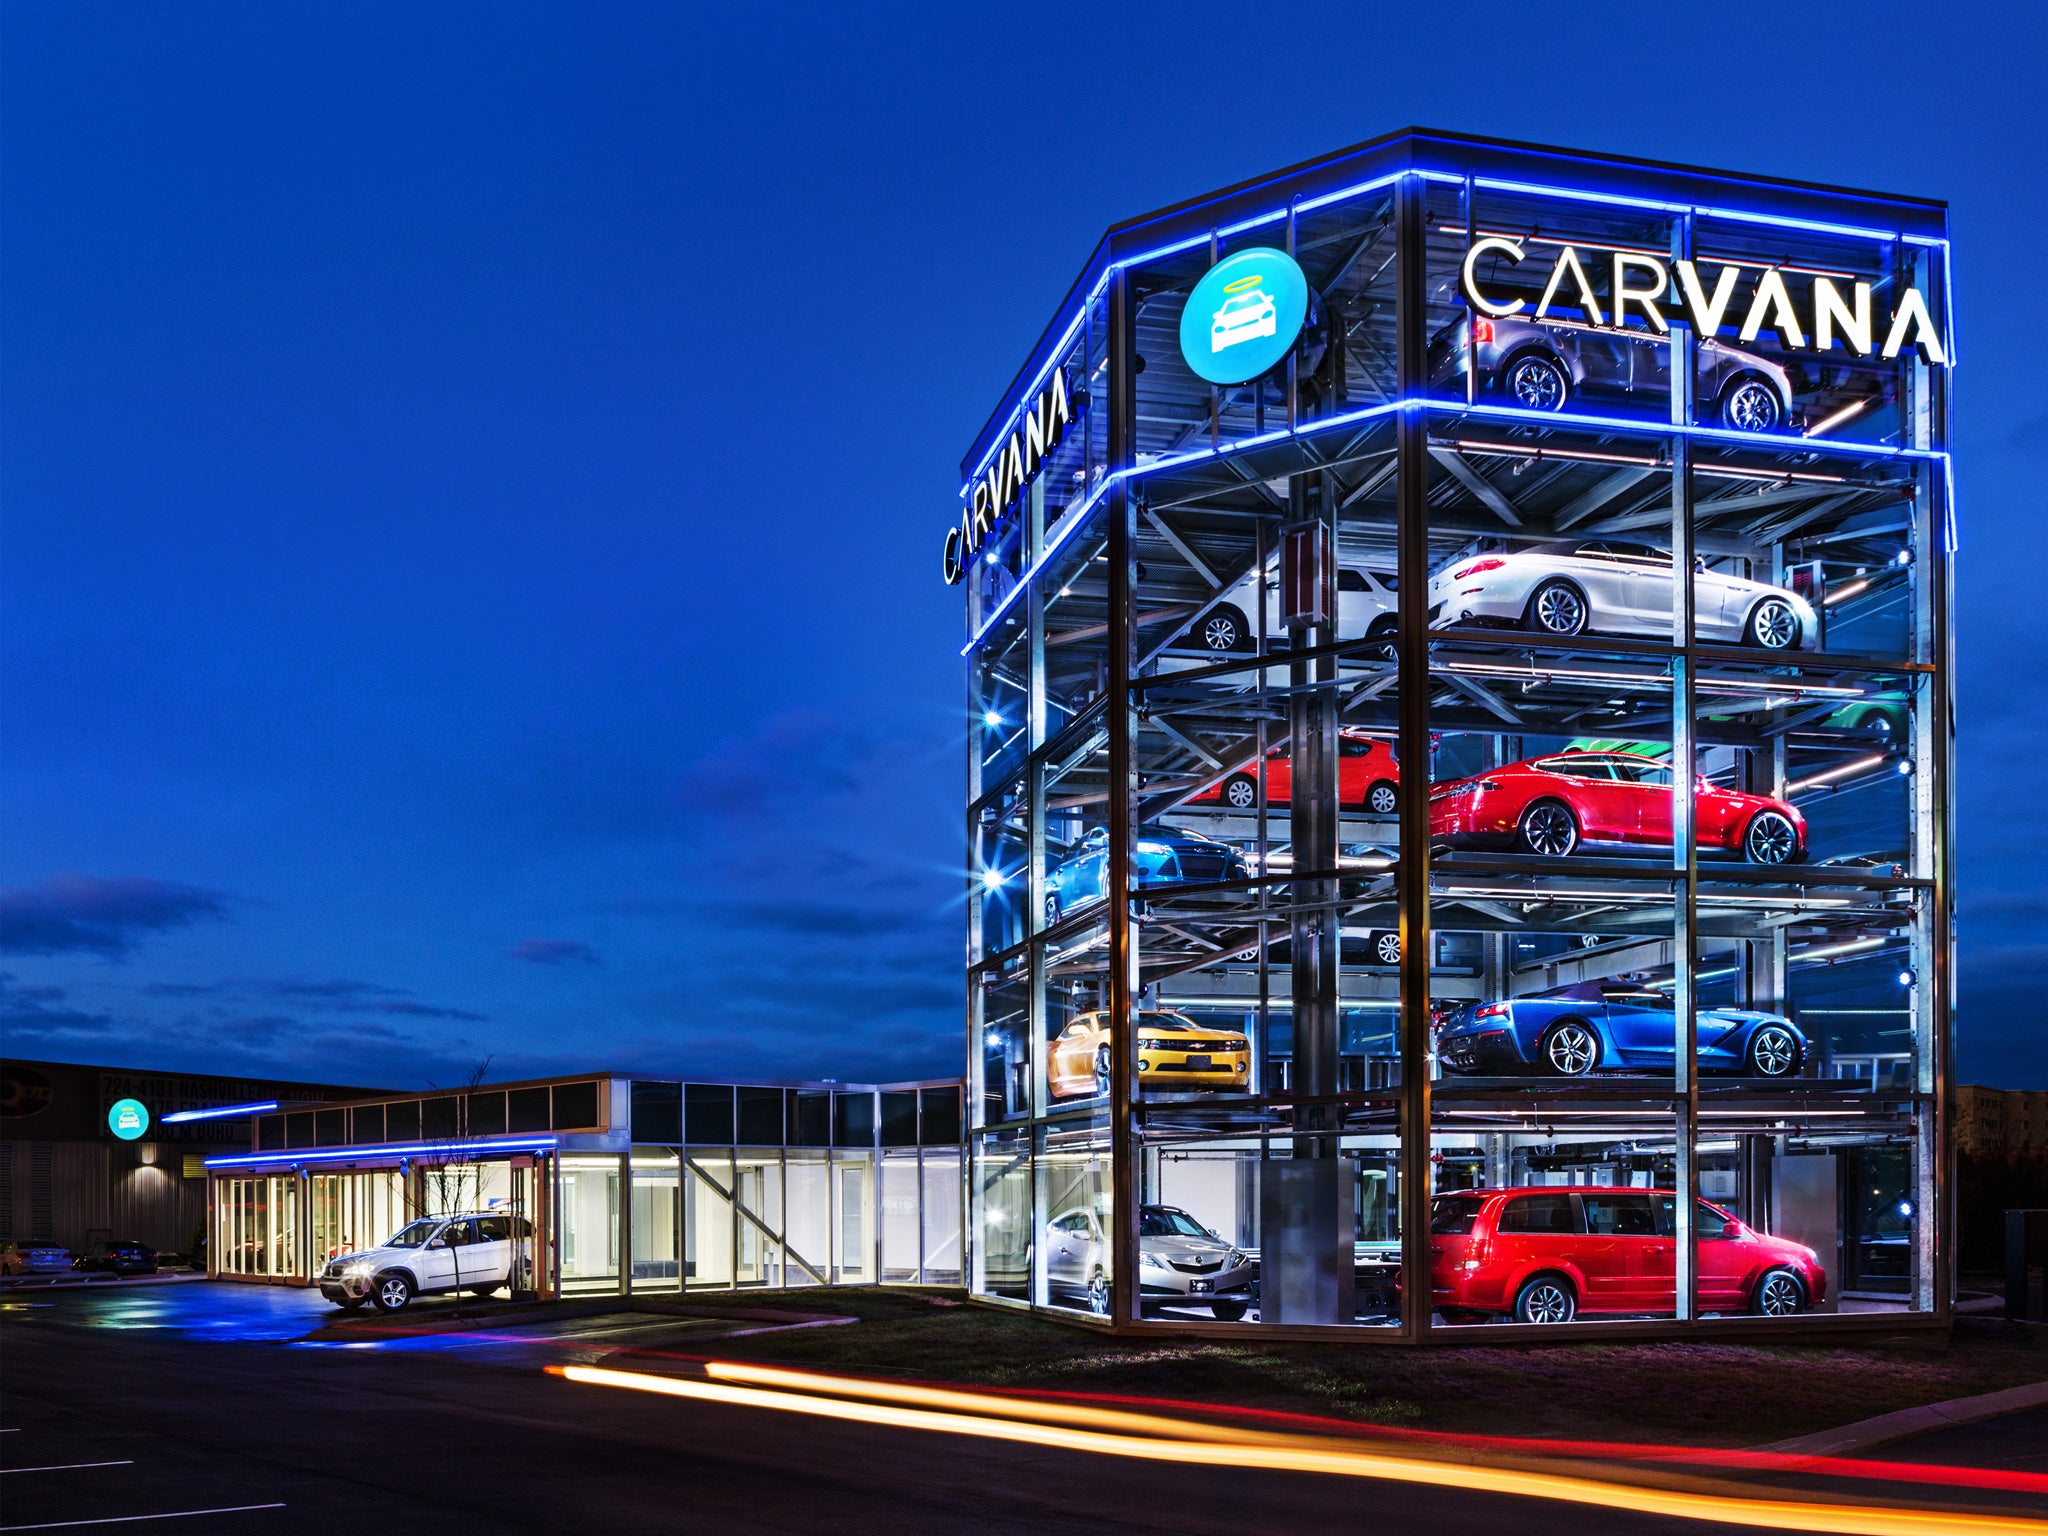 Carvana, the first complete online auto retailer and Forbes 5th Most Promising Company,launched the world’s first, fully-automated, coin-operated car Vending Machine in Nashville in November